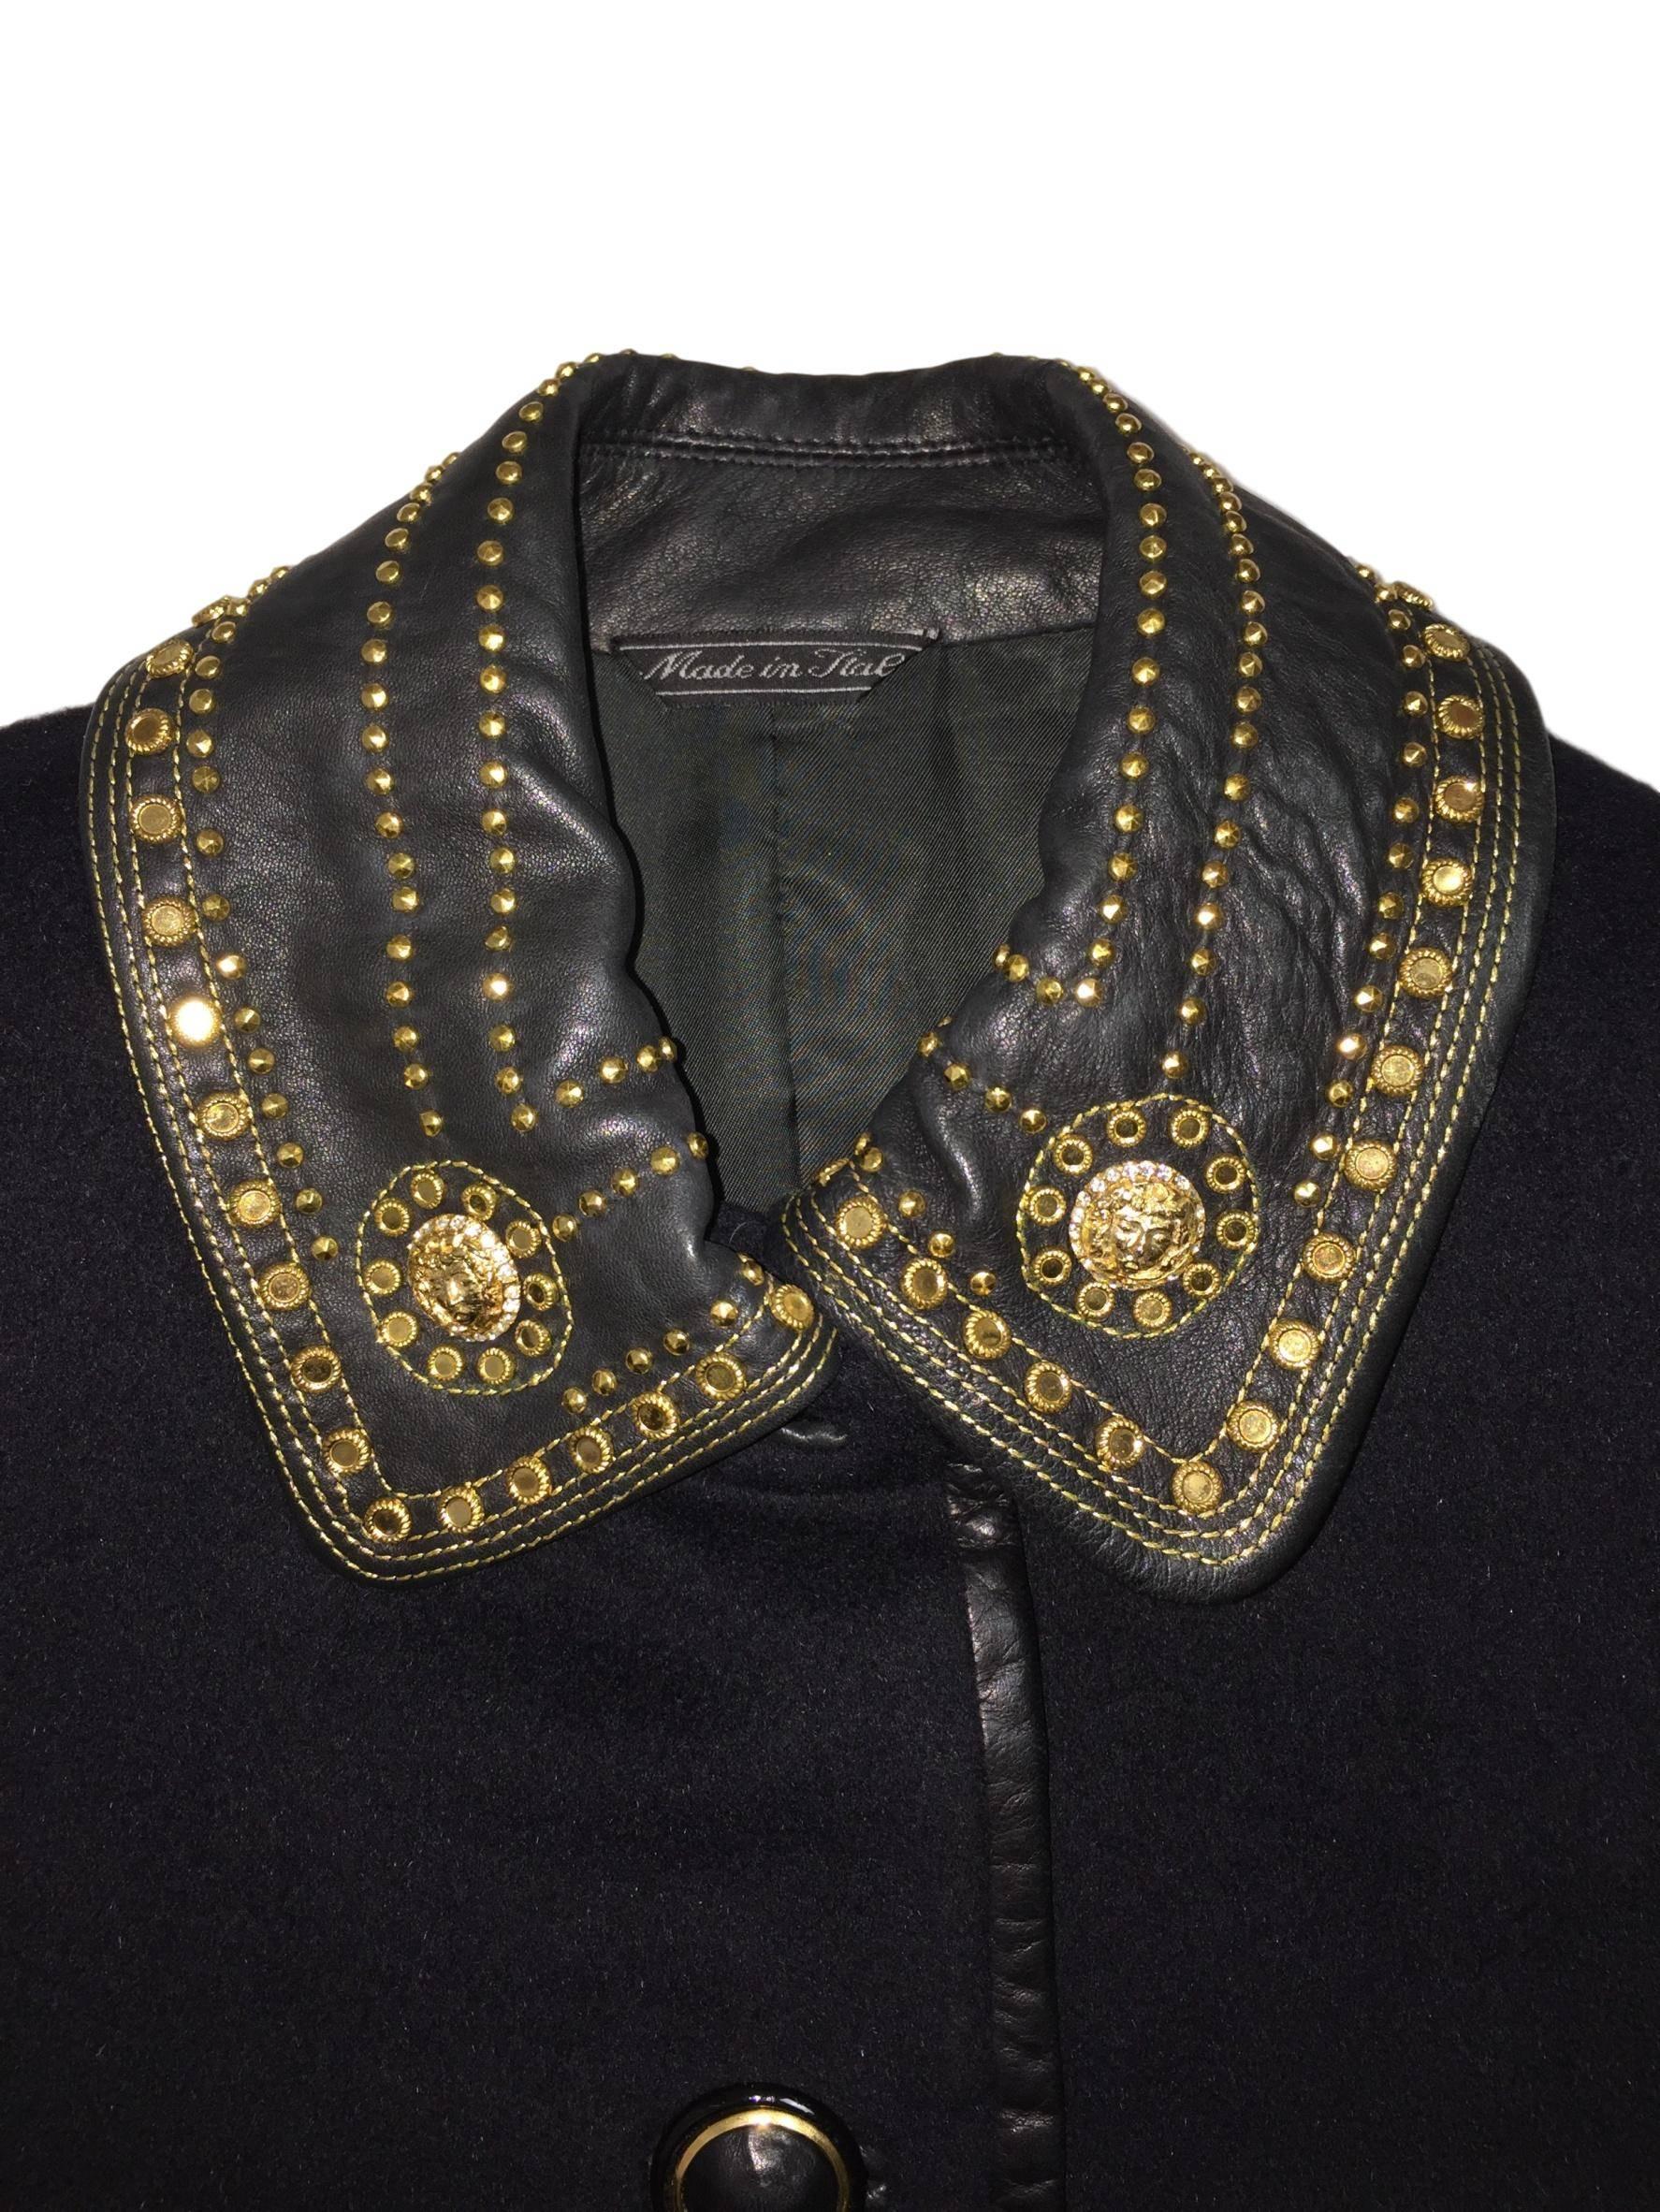 F/W 1992 Gianni Versace Couture Studded Bondage Black Fitted Wool Jacket 40 1